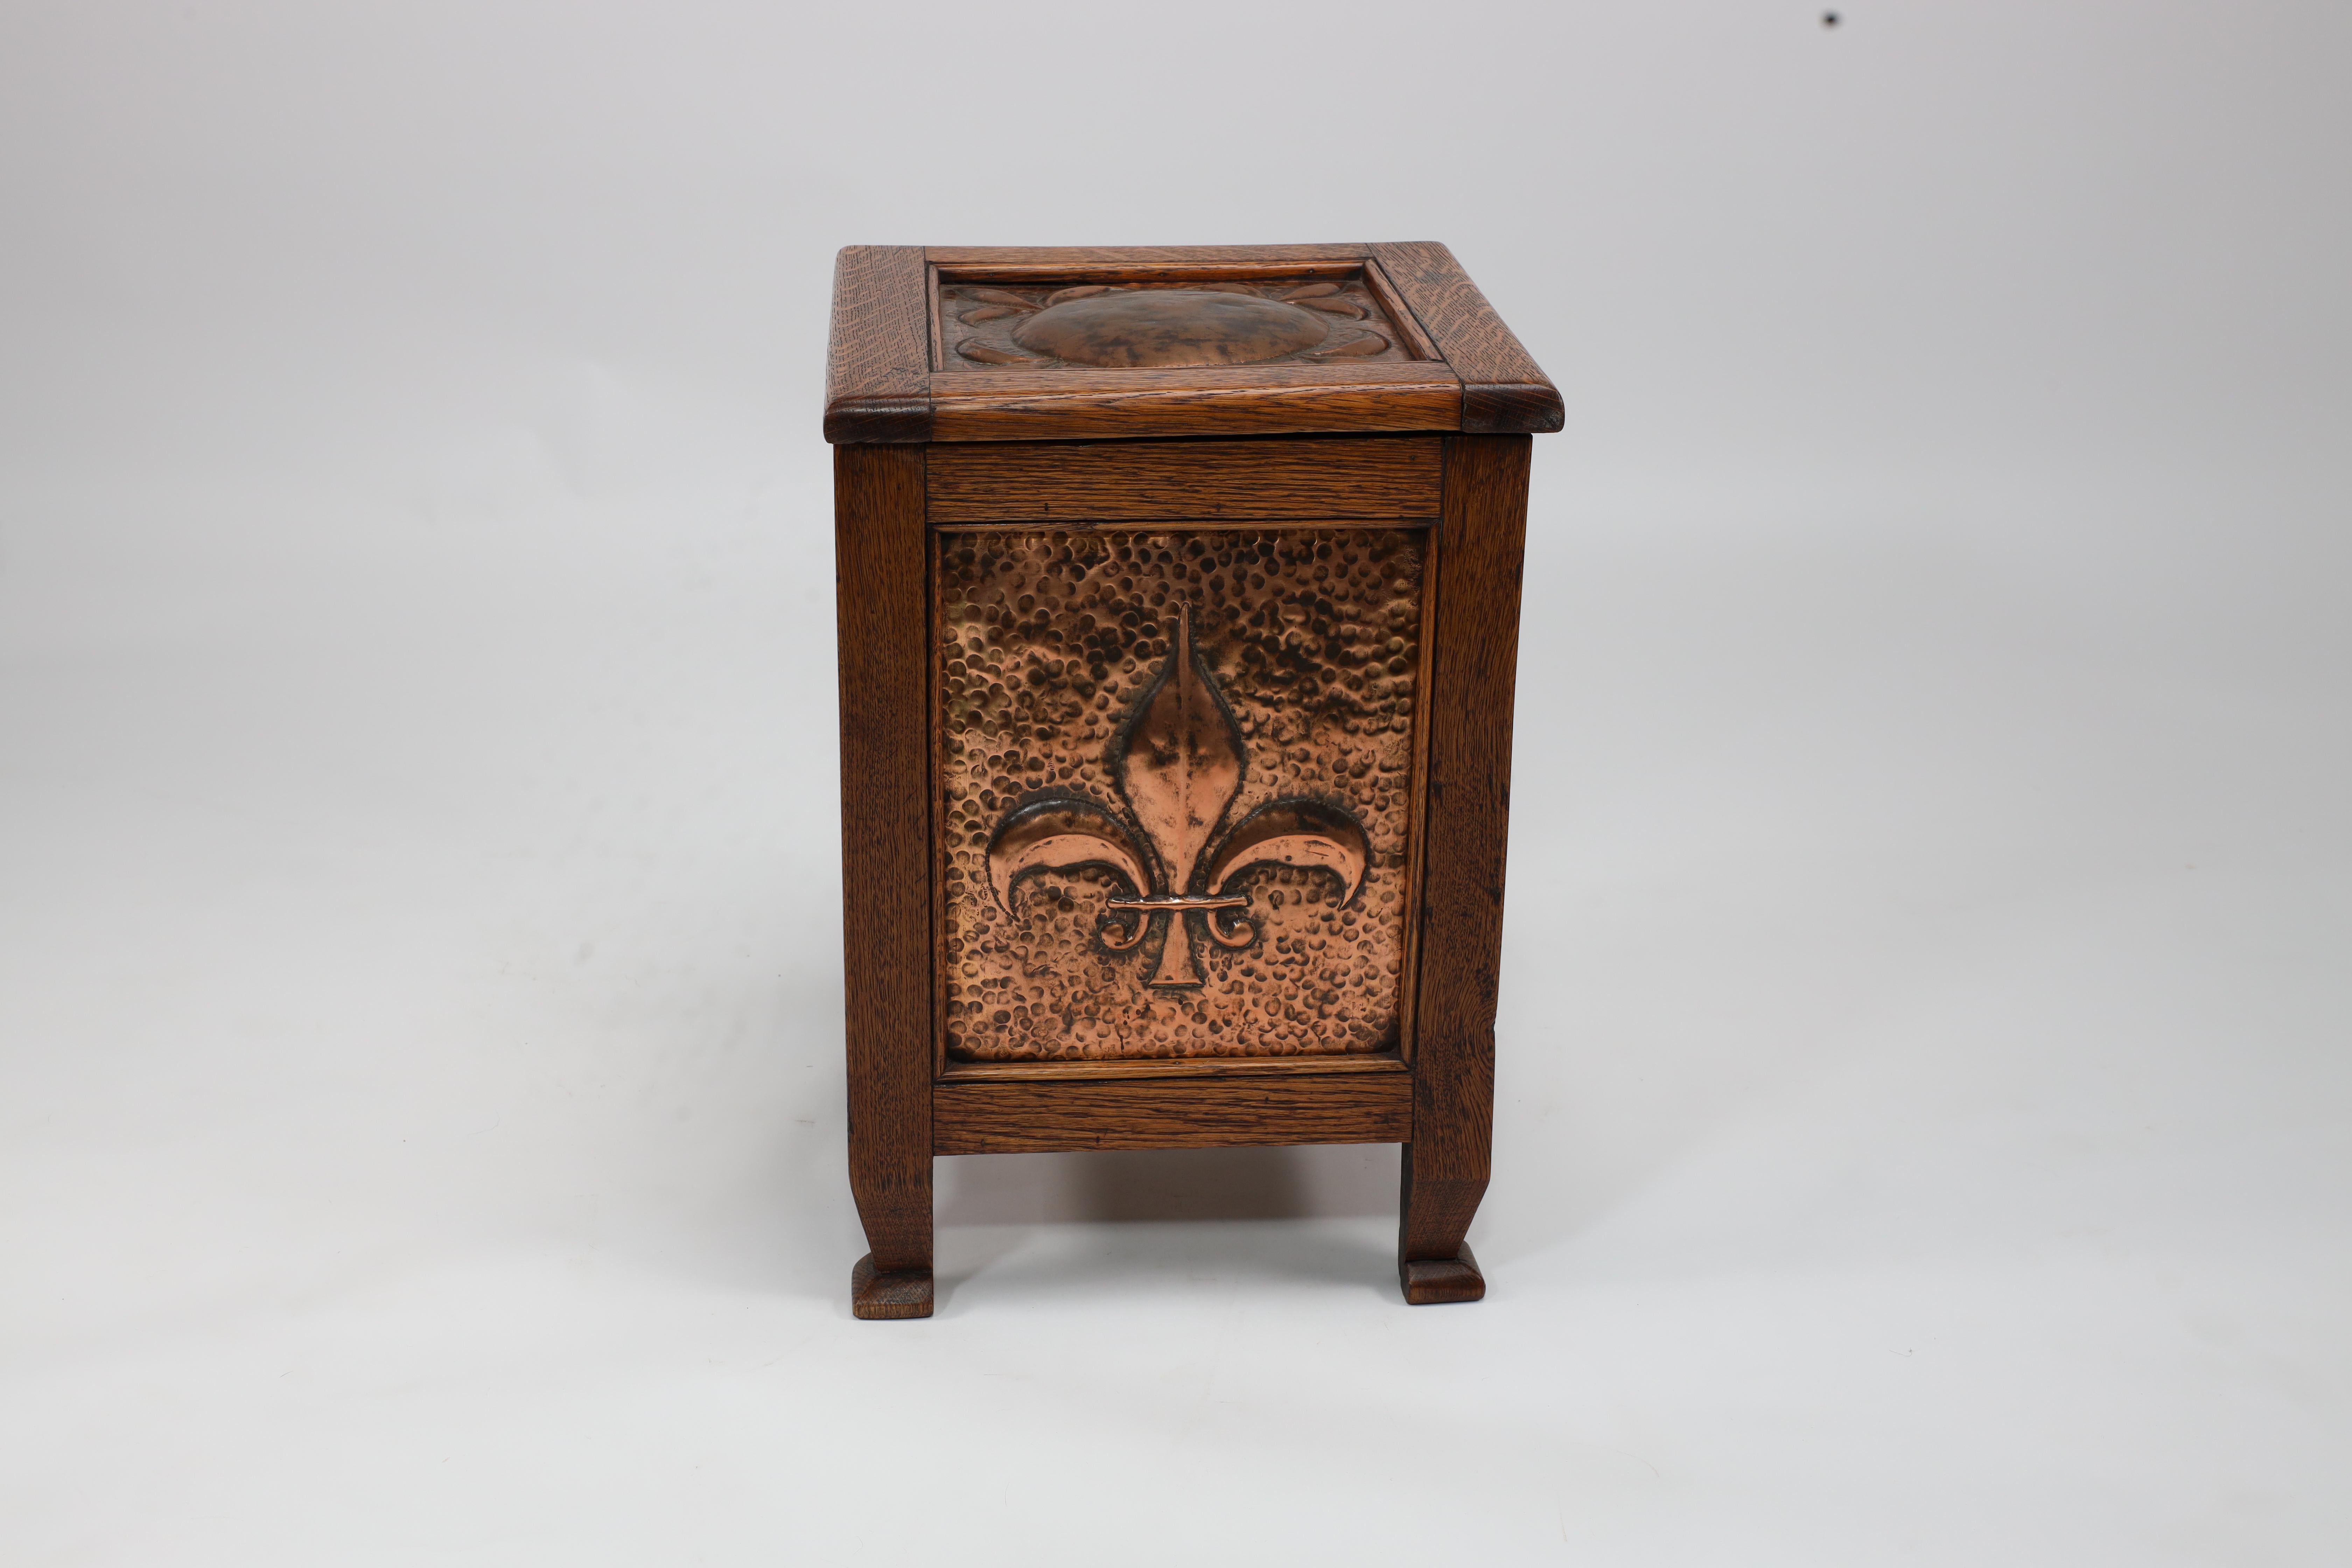 John Pearson attributed. An Arts and Crafts log or coal box with hand-formed circular Fluer De Lys copper panels to the top and larger Fleur De Lys to the sides.